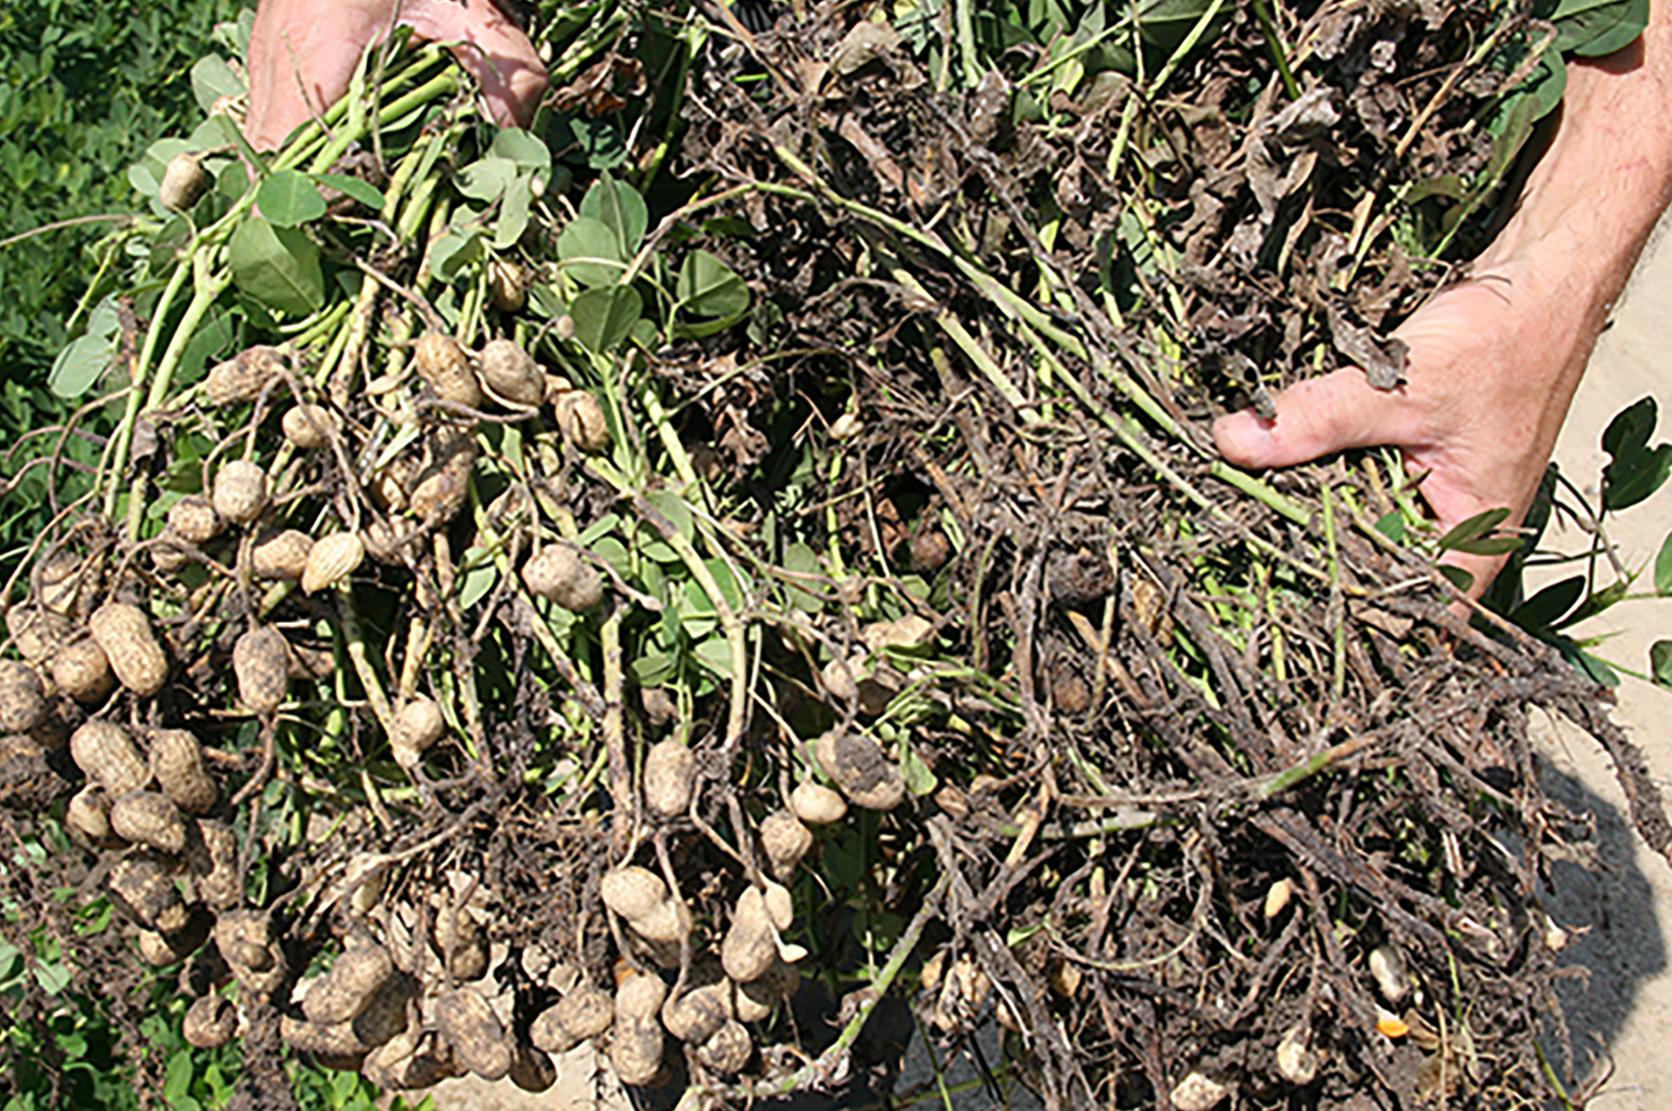 Pictured is a comparison between healthy peanuts and those infected with white mold disease.